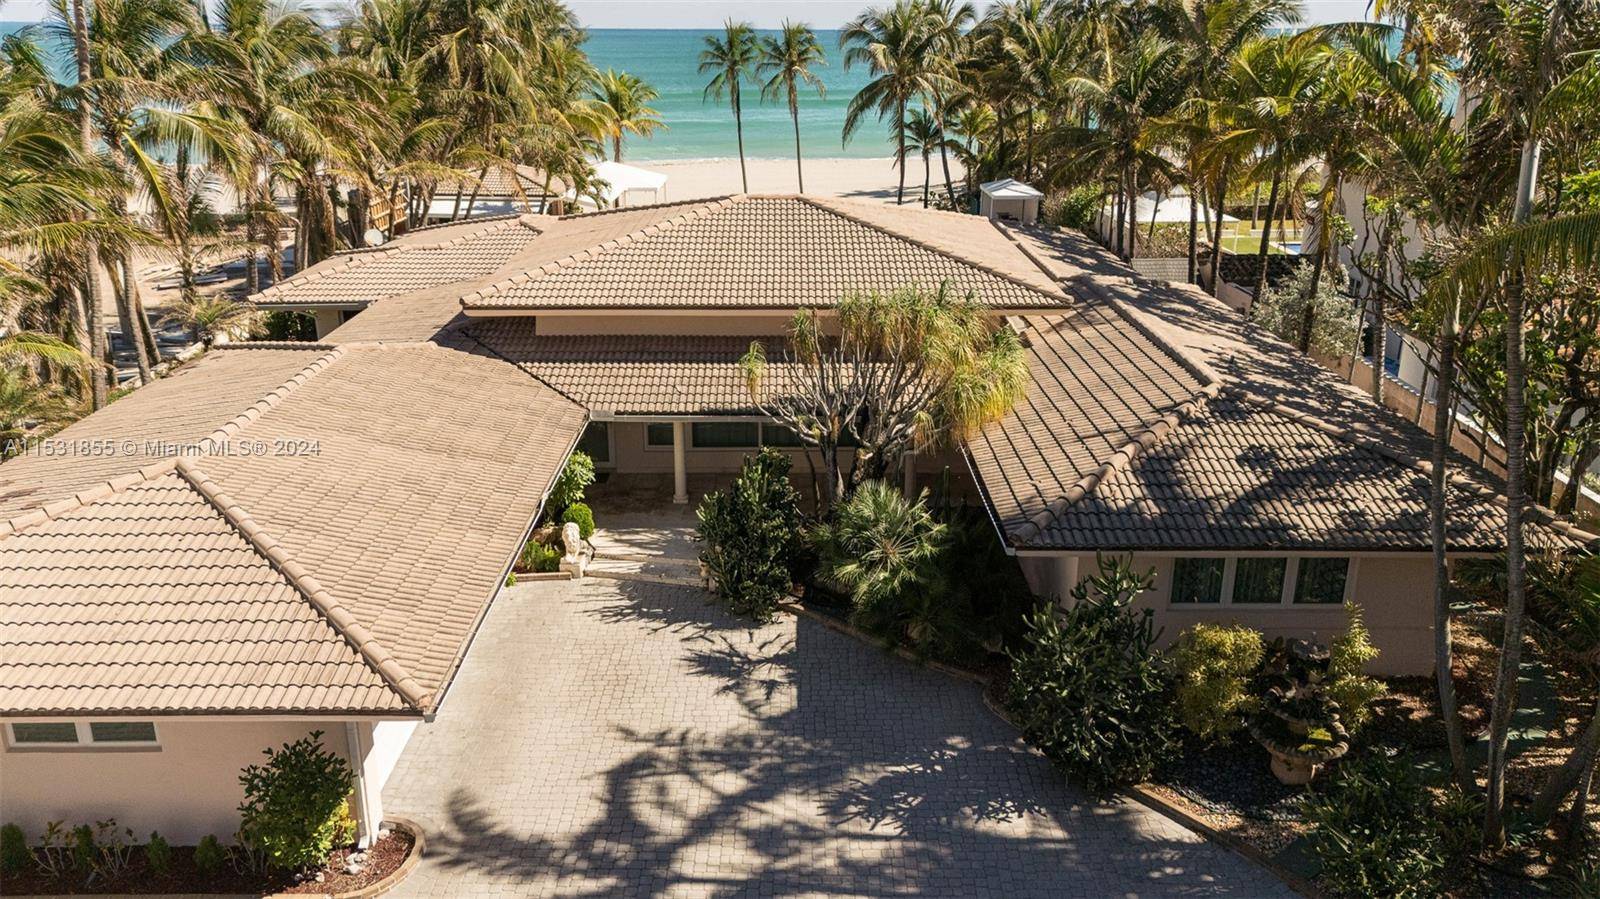 Experience the epitome of coastal living in this beautifully furnished 4 bedroom and 4, 5 bathroom home boasting 4, 144 square feet of living space and a two car garage.